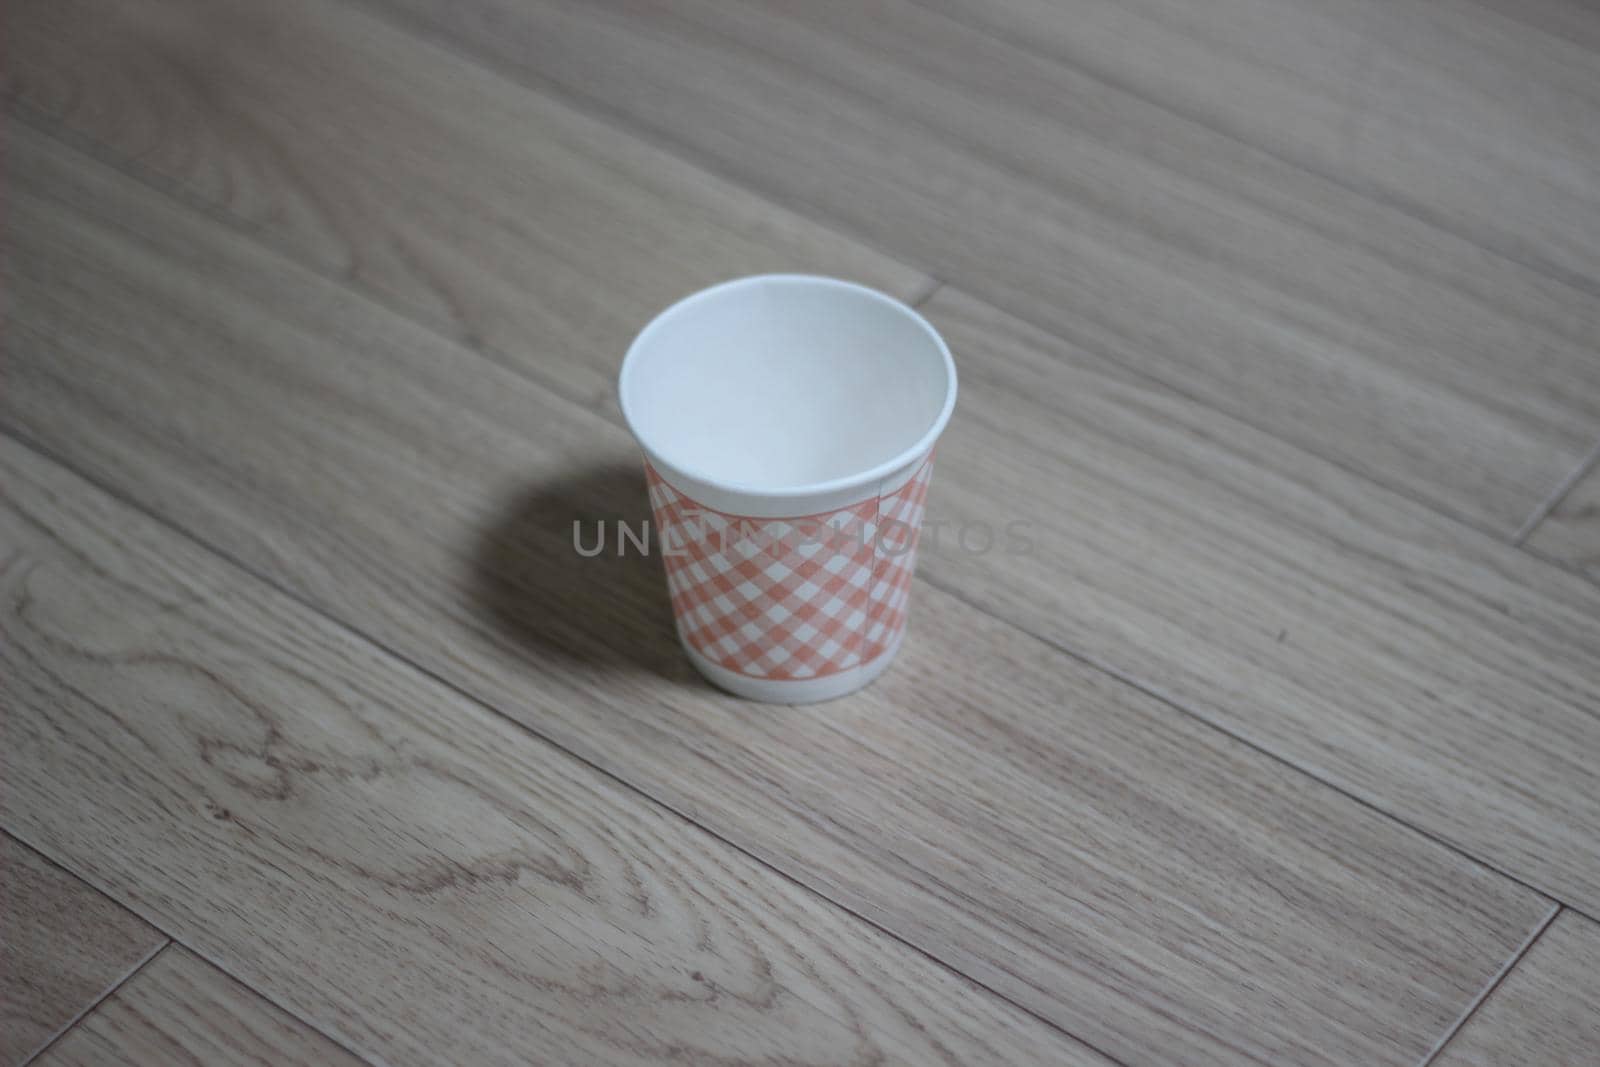 Paper, cardboard disposable glass on a wooden floor. Disposable paper cups on the wooden floor